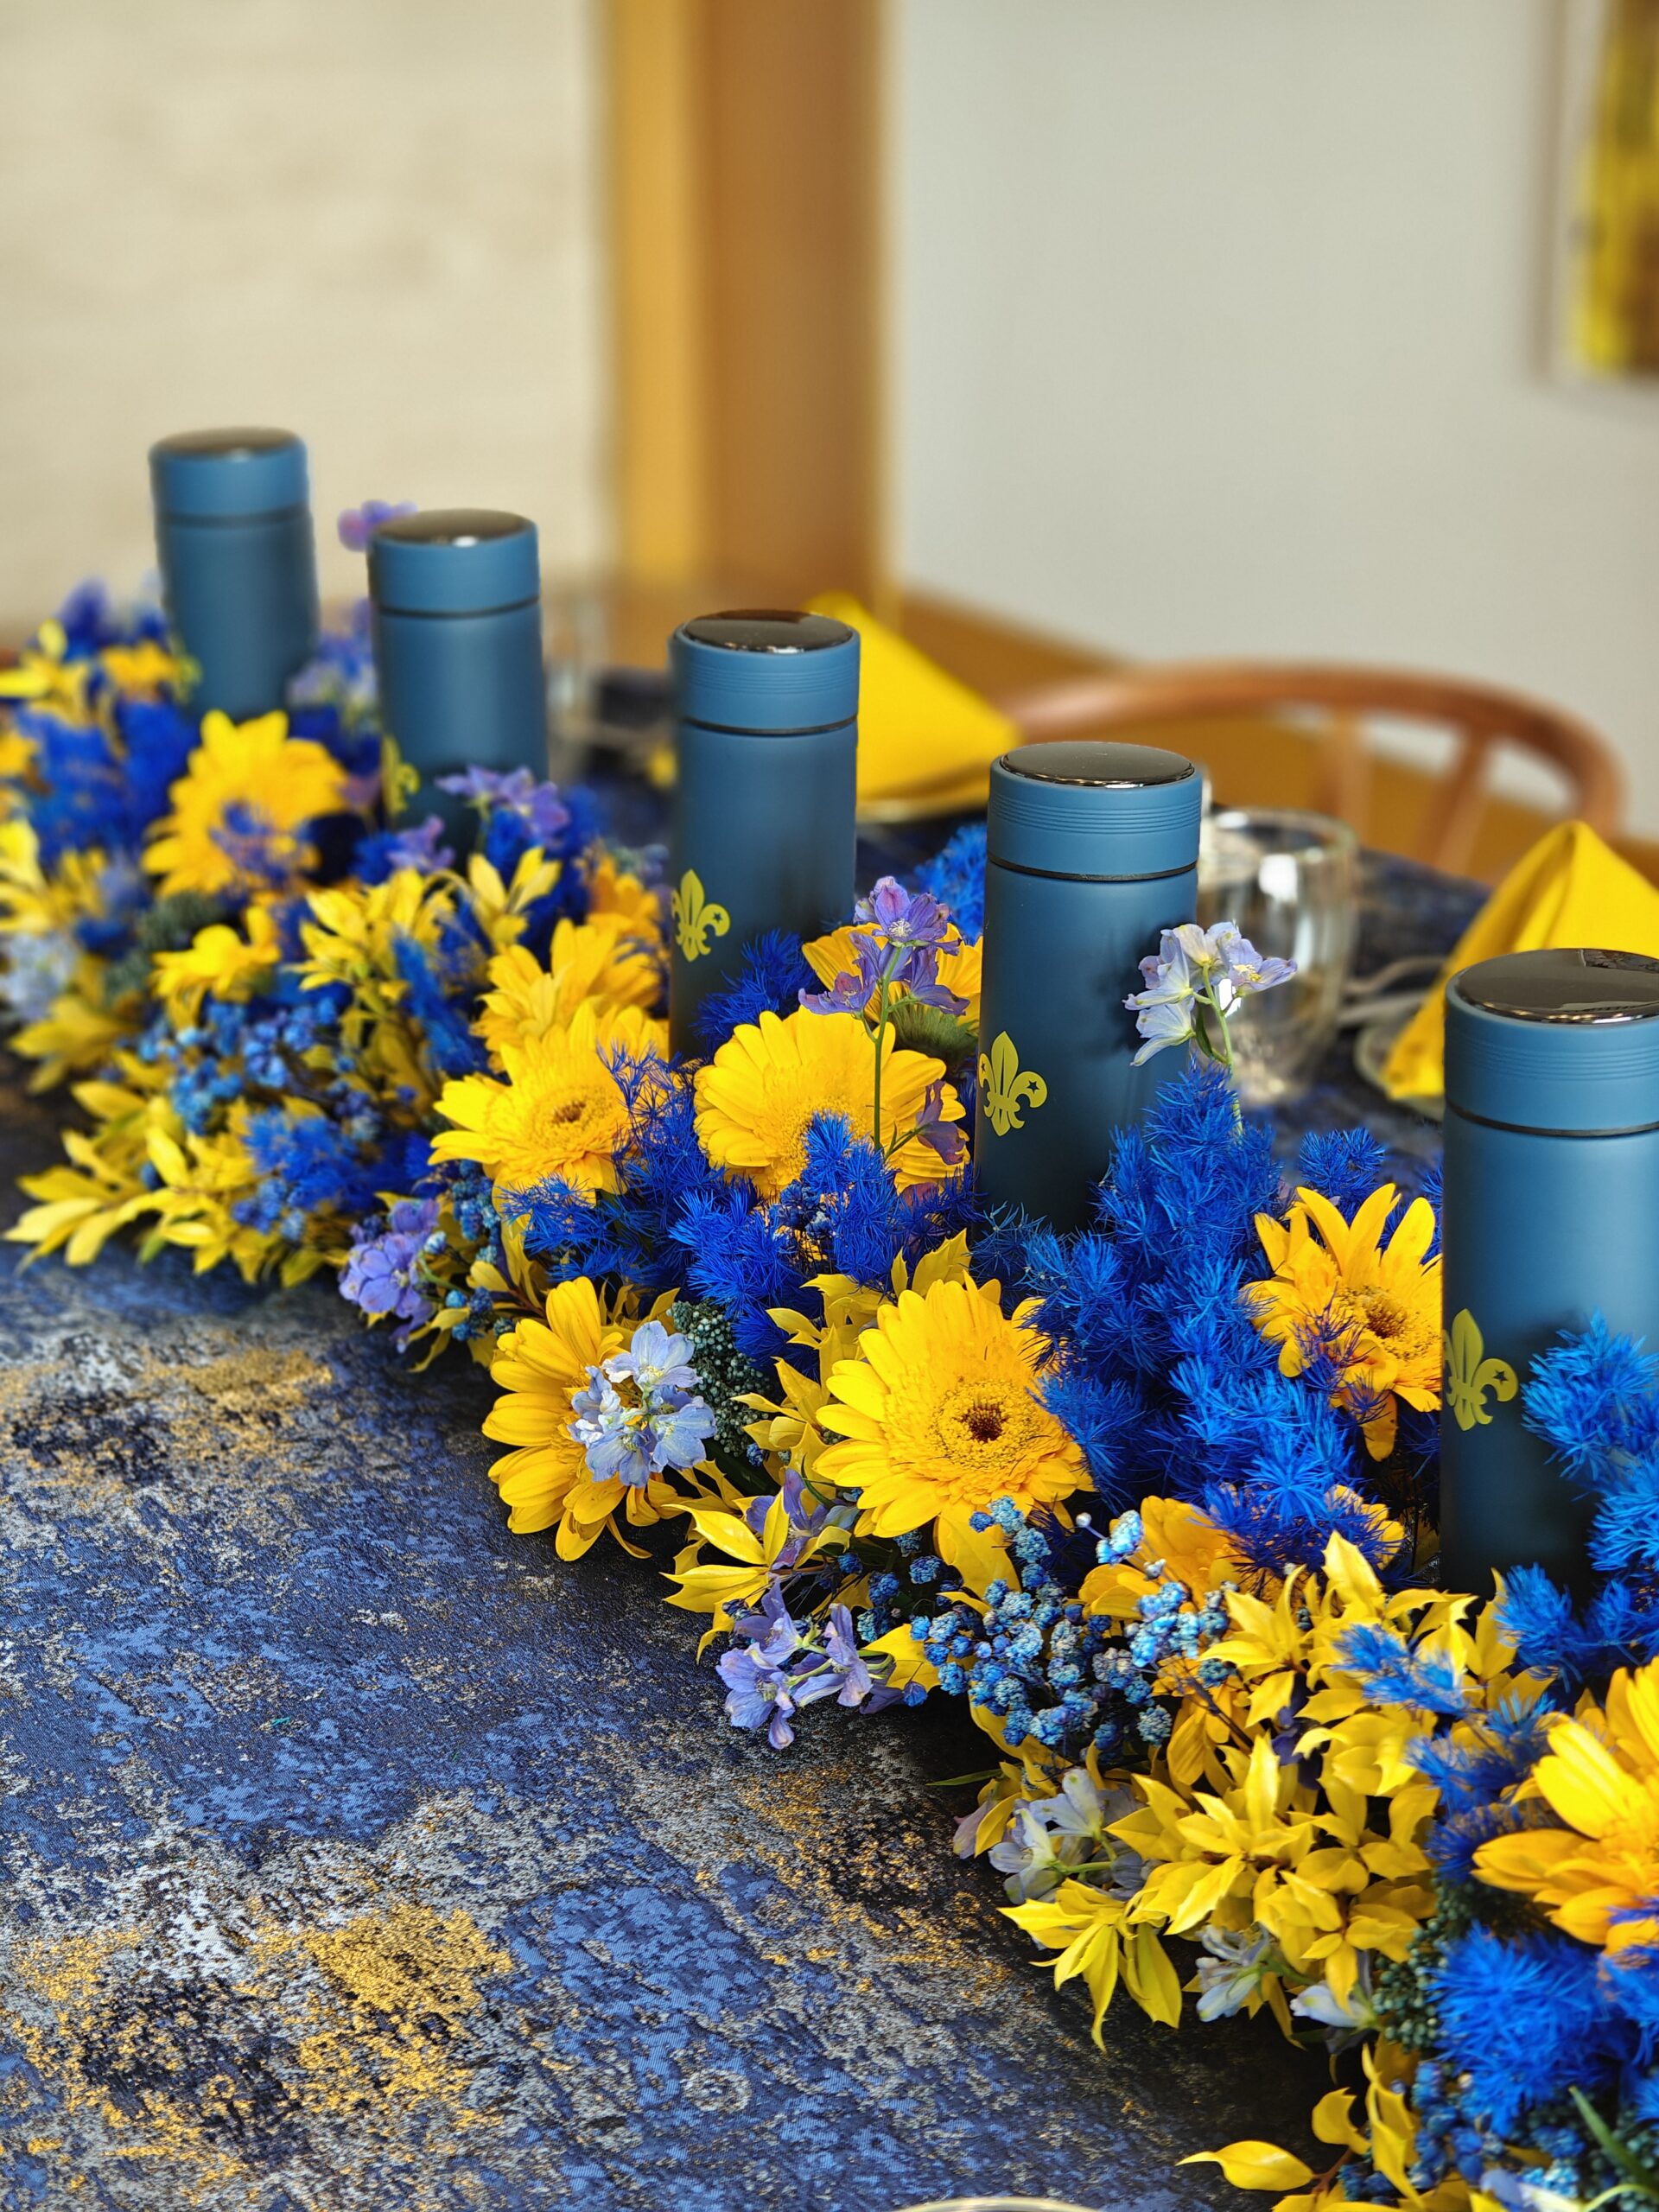 A scouting-themed celebration setup with tents, folding chairs, and thermal flask water bottles as centerpieces, embodying the adventure and tradition.